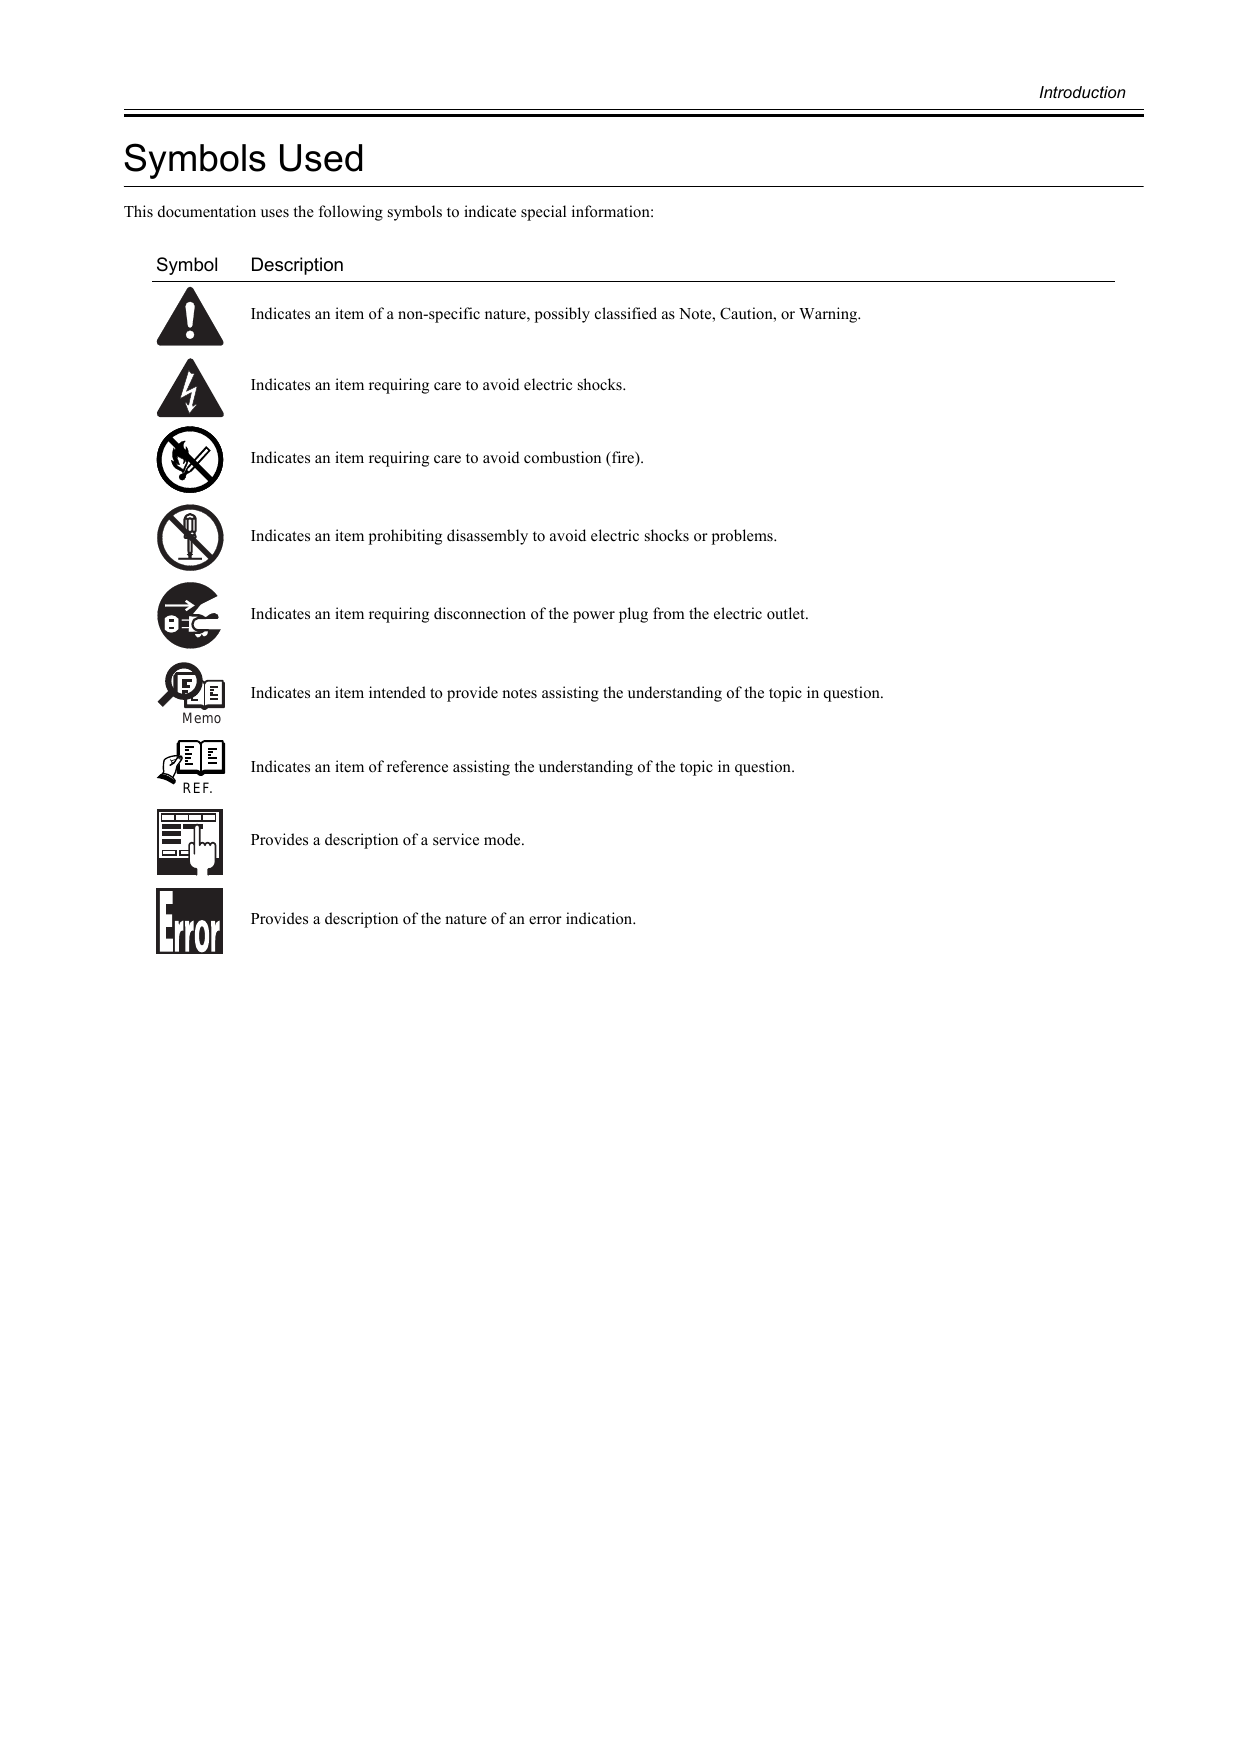 Canon imageRUNNER IR C6800 series copier service manual Preview image 4